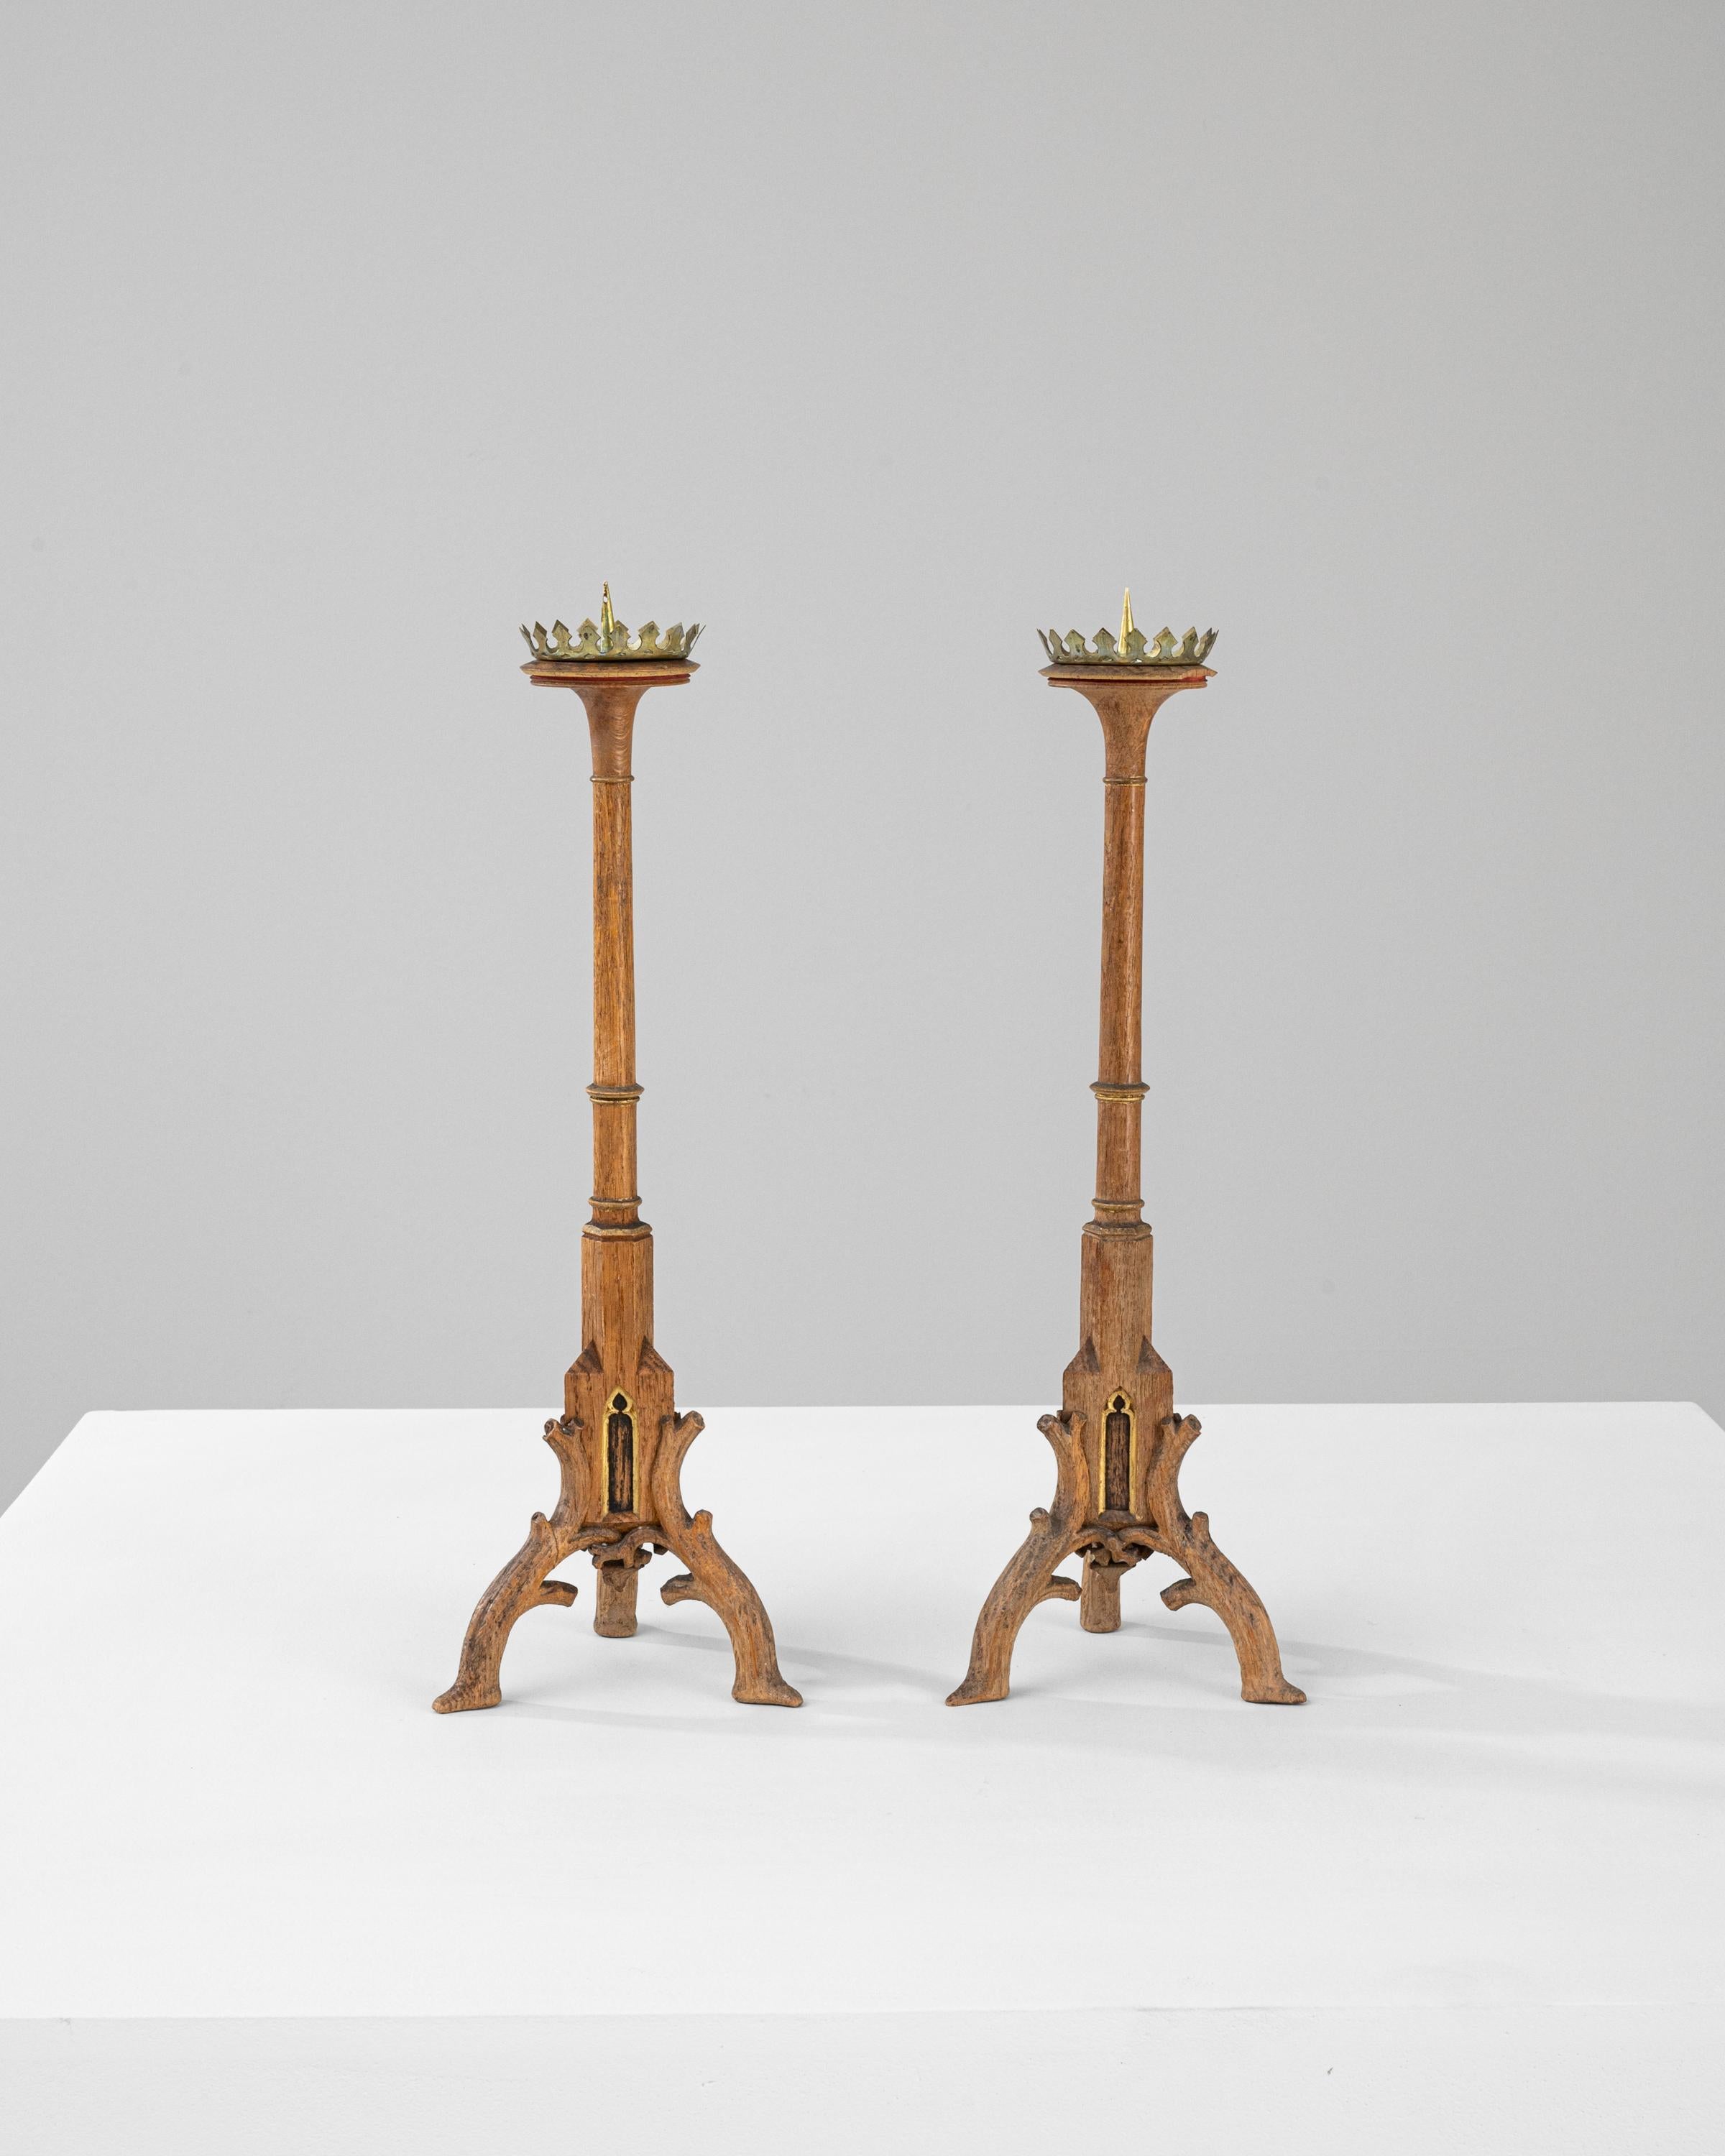 19th Century French Wooden Candlesticks, a Pair For Sale 3